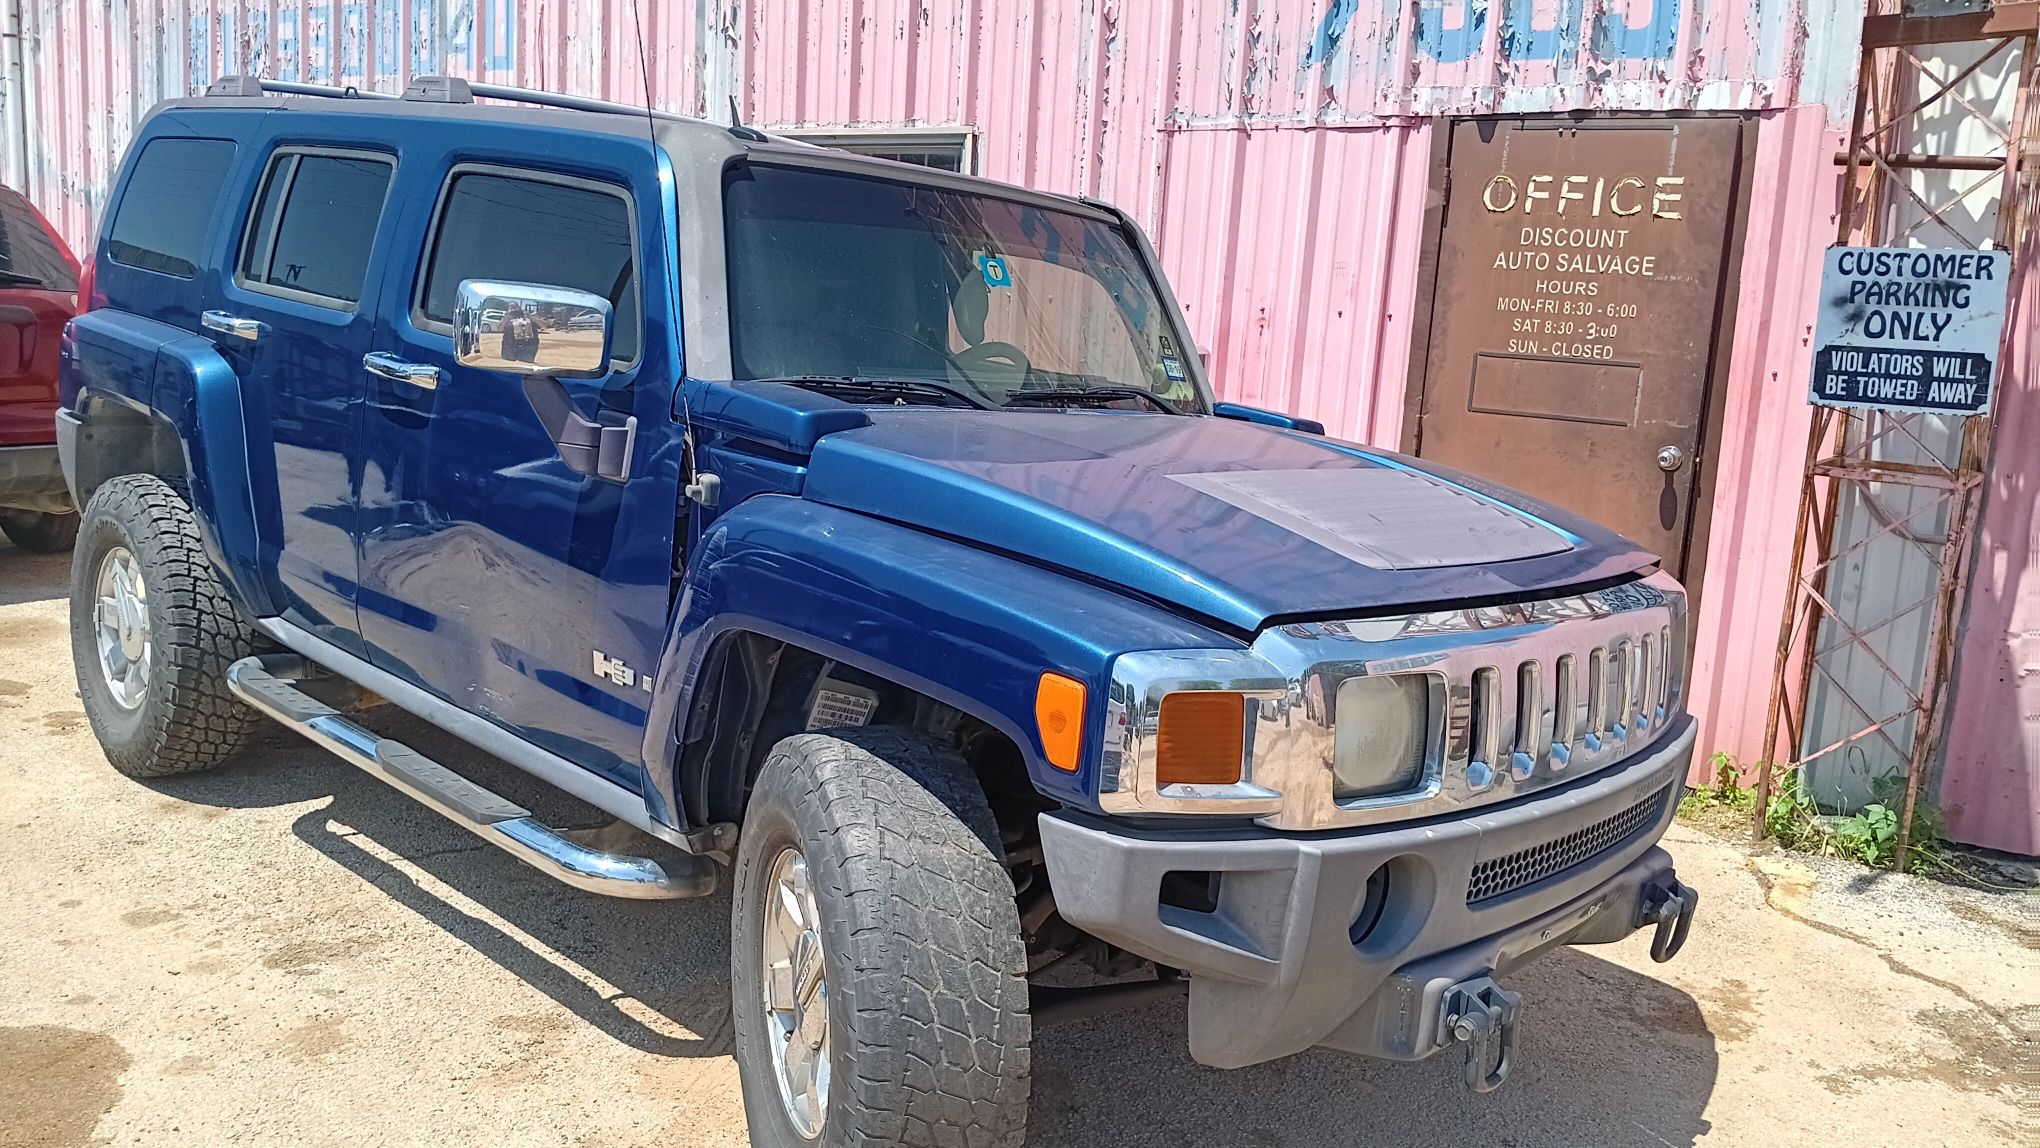 2006 Hummer H3 - Parts Only #EB8